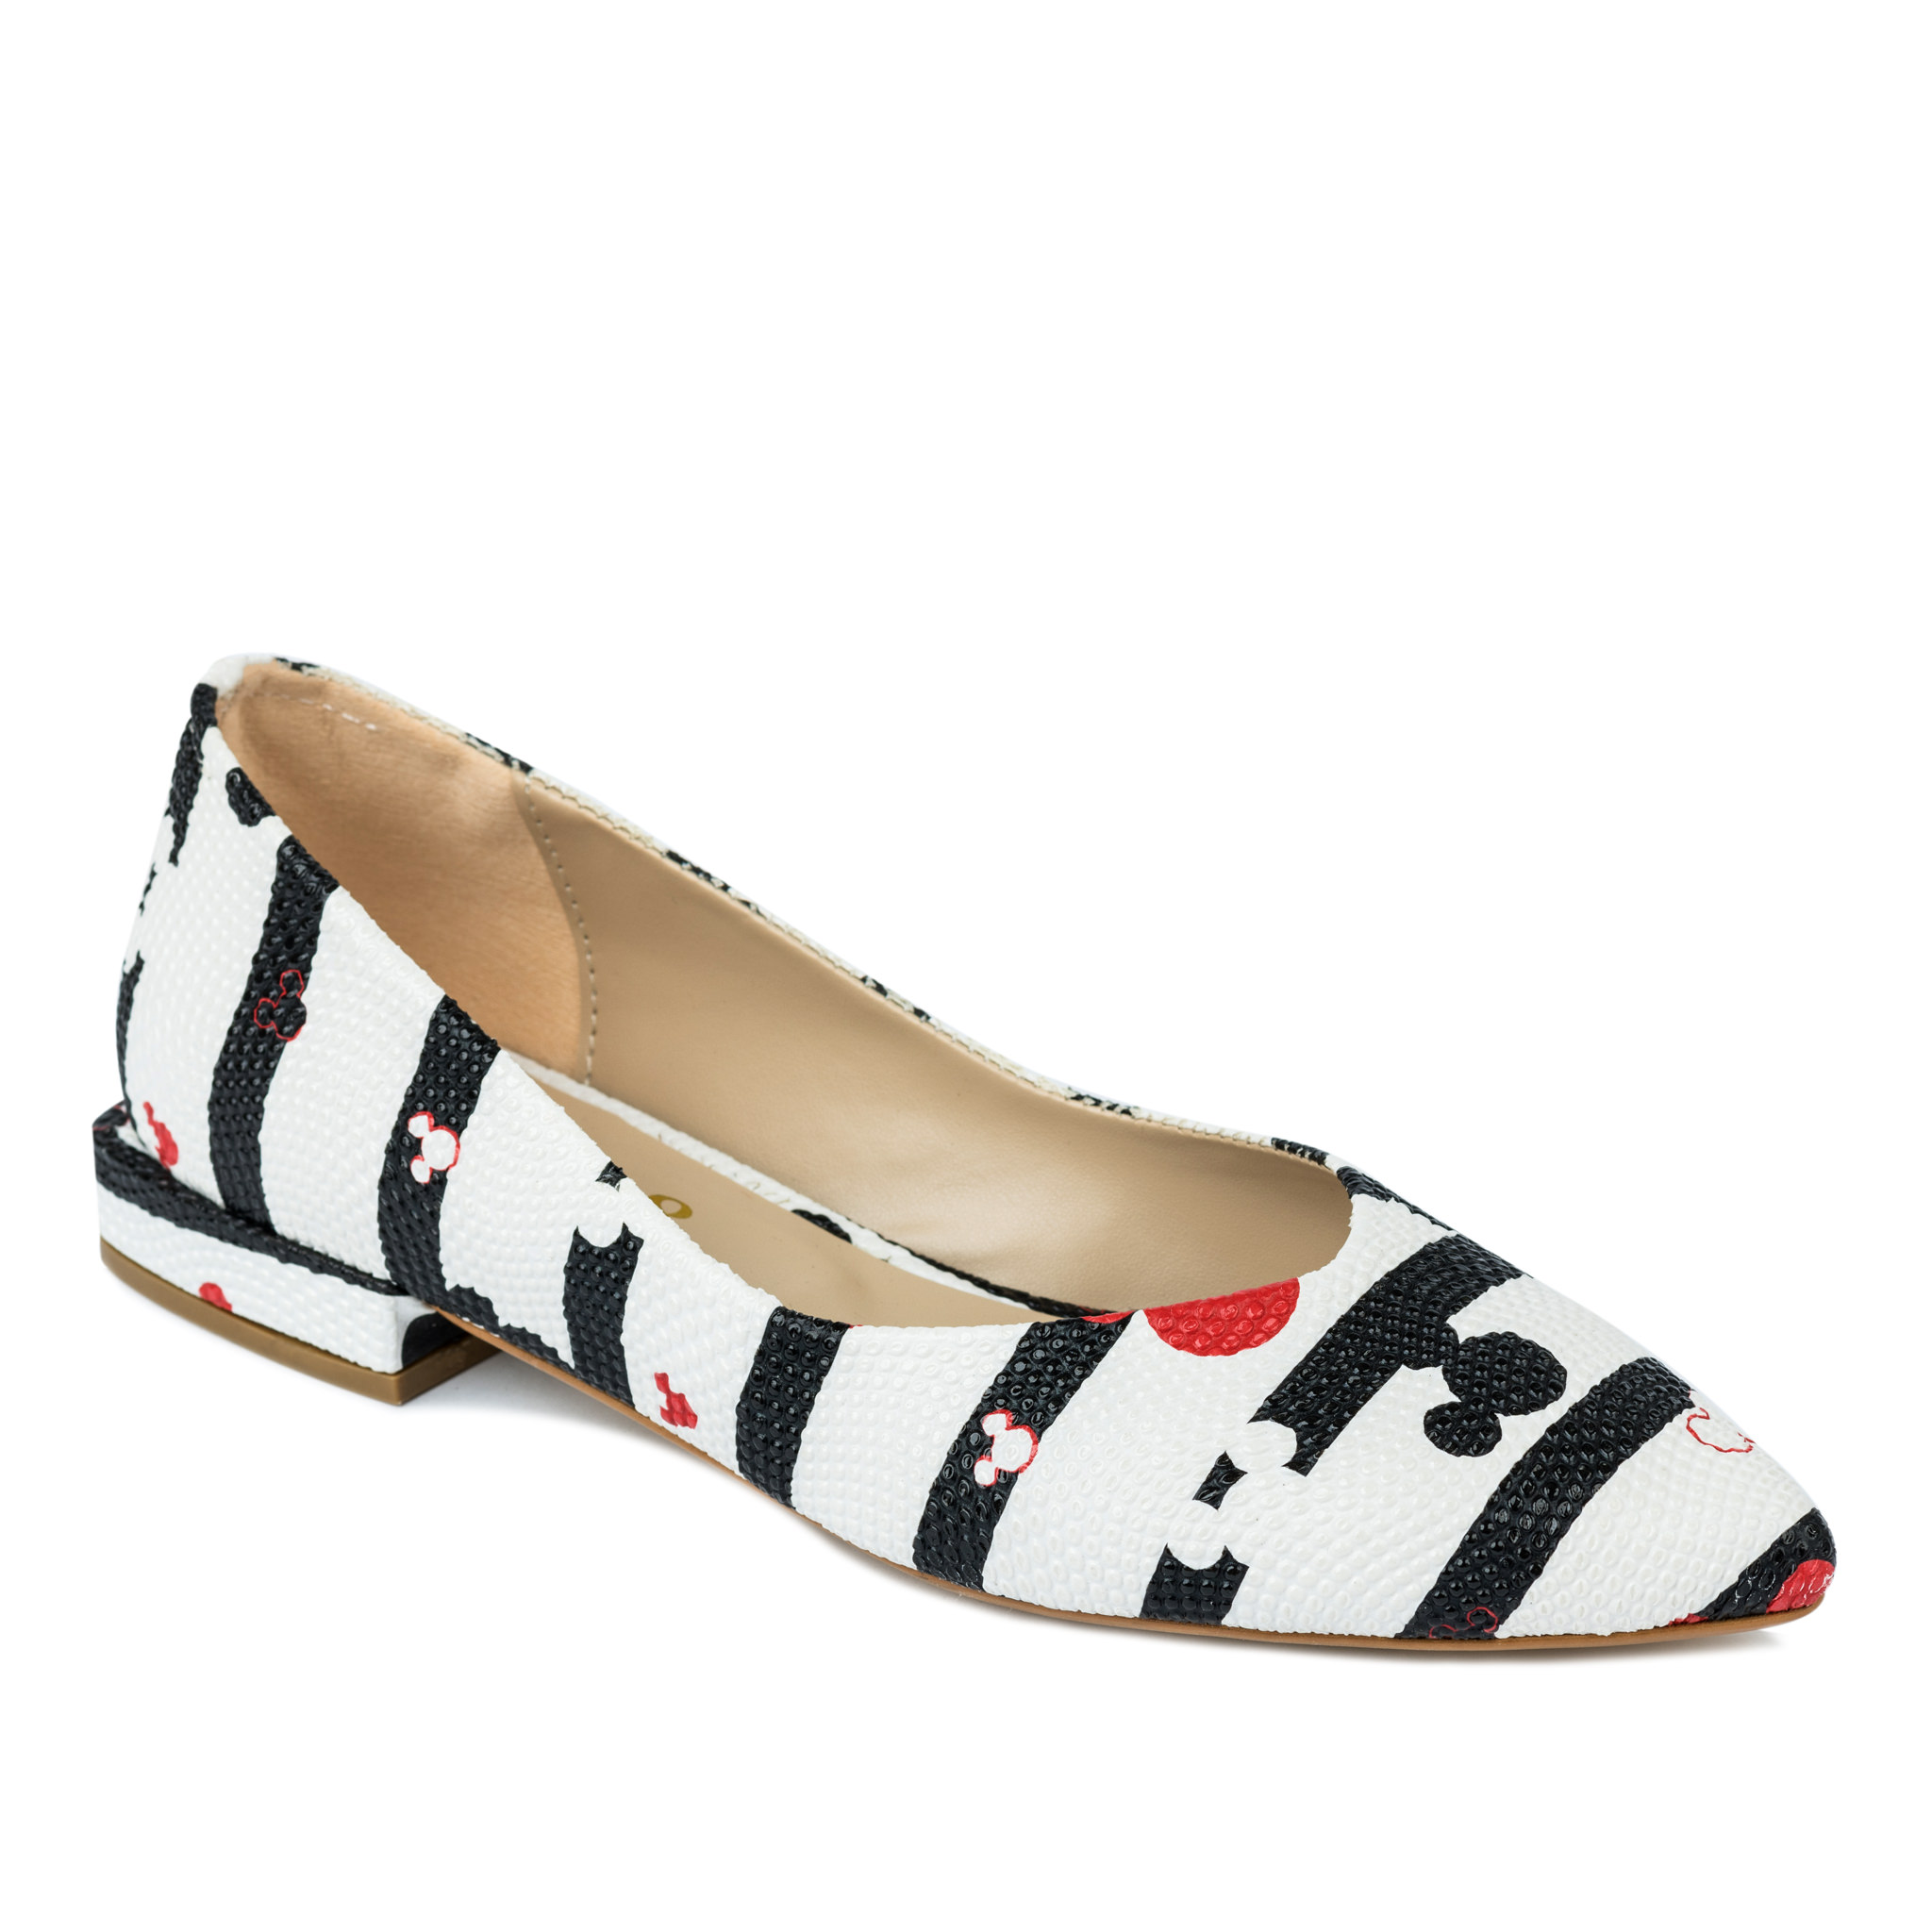 MICKEY POINTED FLATS - WHITE